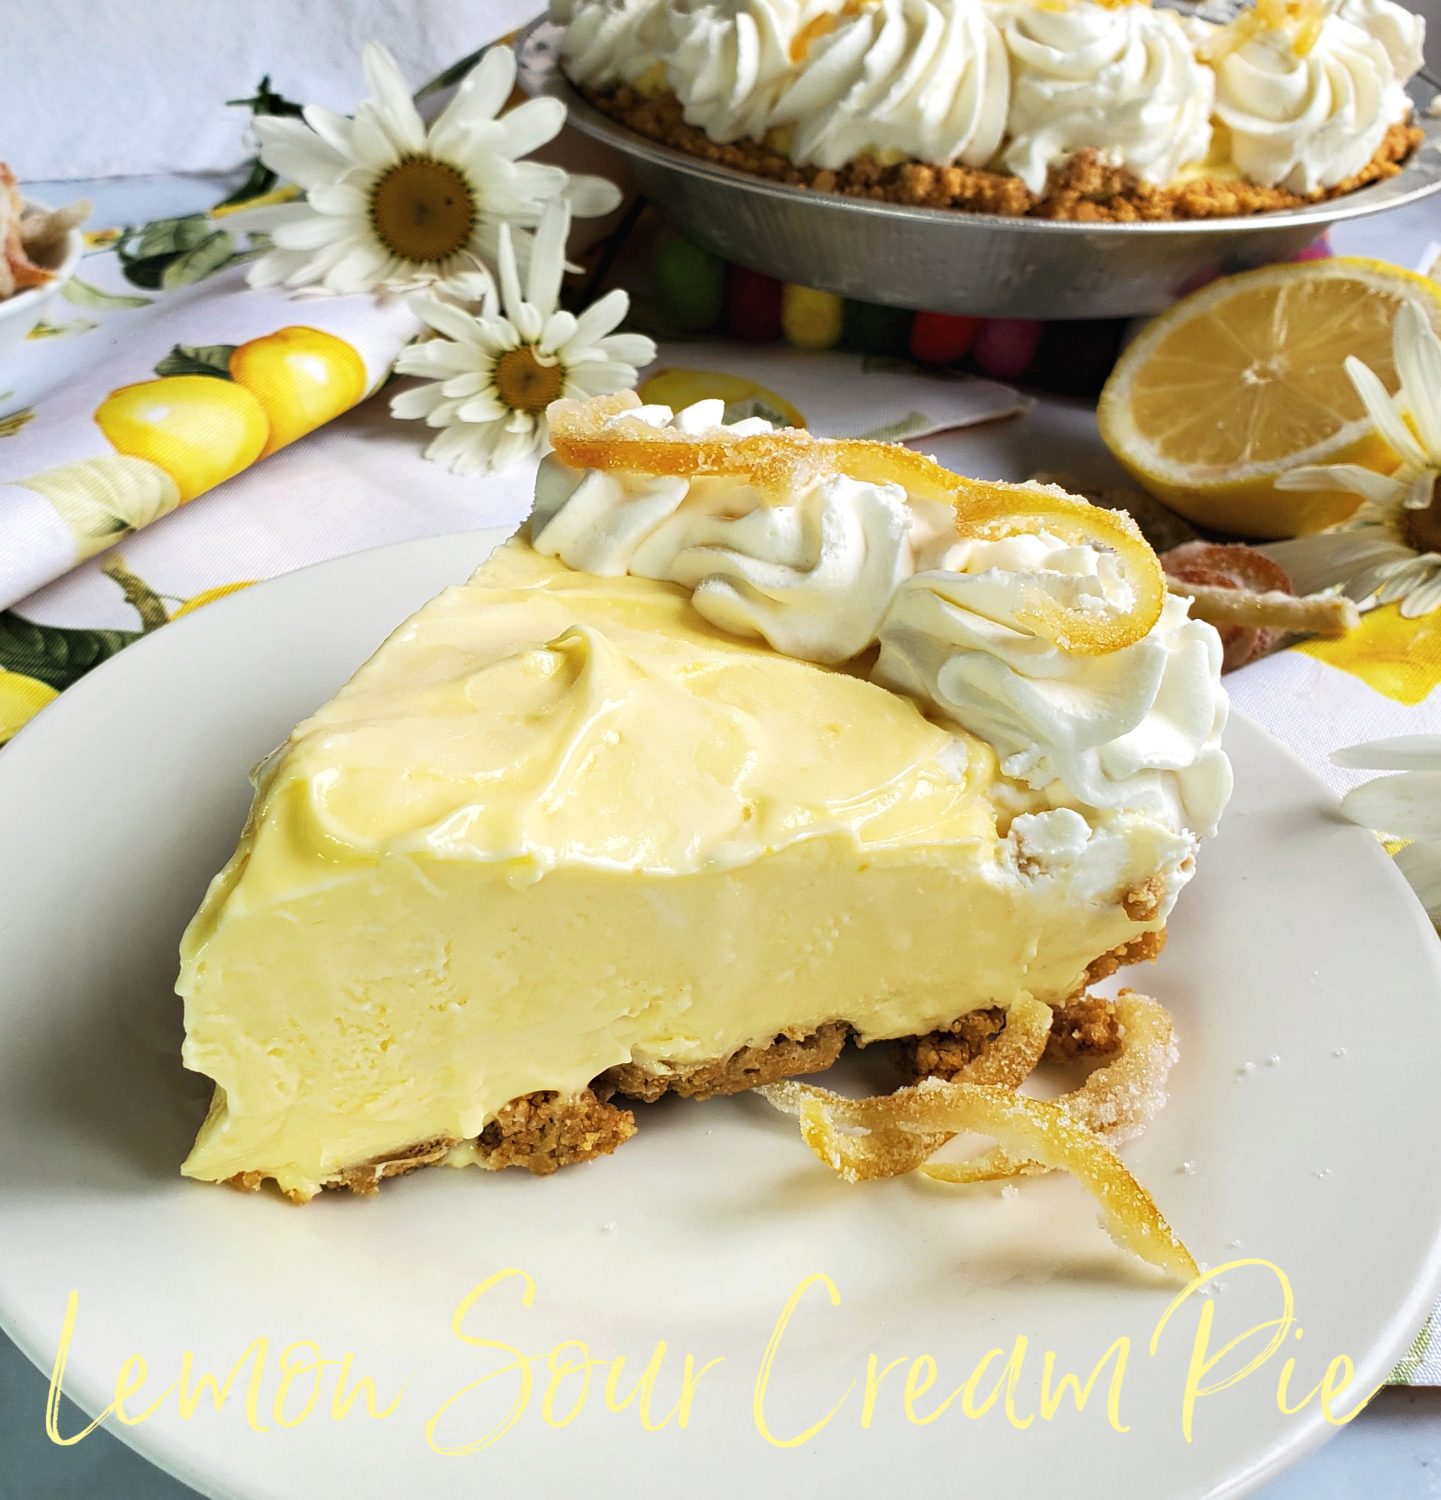 Lemon Sour Cream Pie: A happy accident created this new & improved creamy lemon pie with the perfect amount of sweet & tangy lemon-zested beauty. 